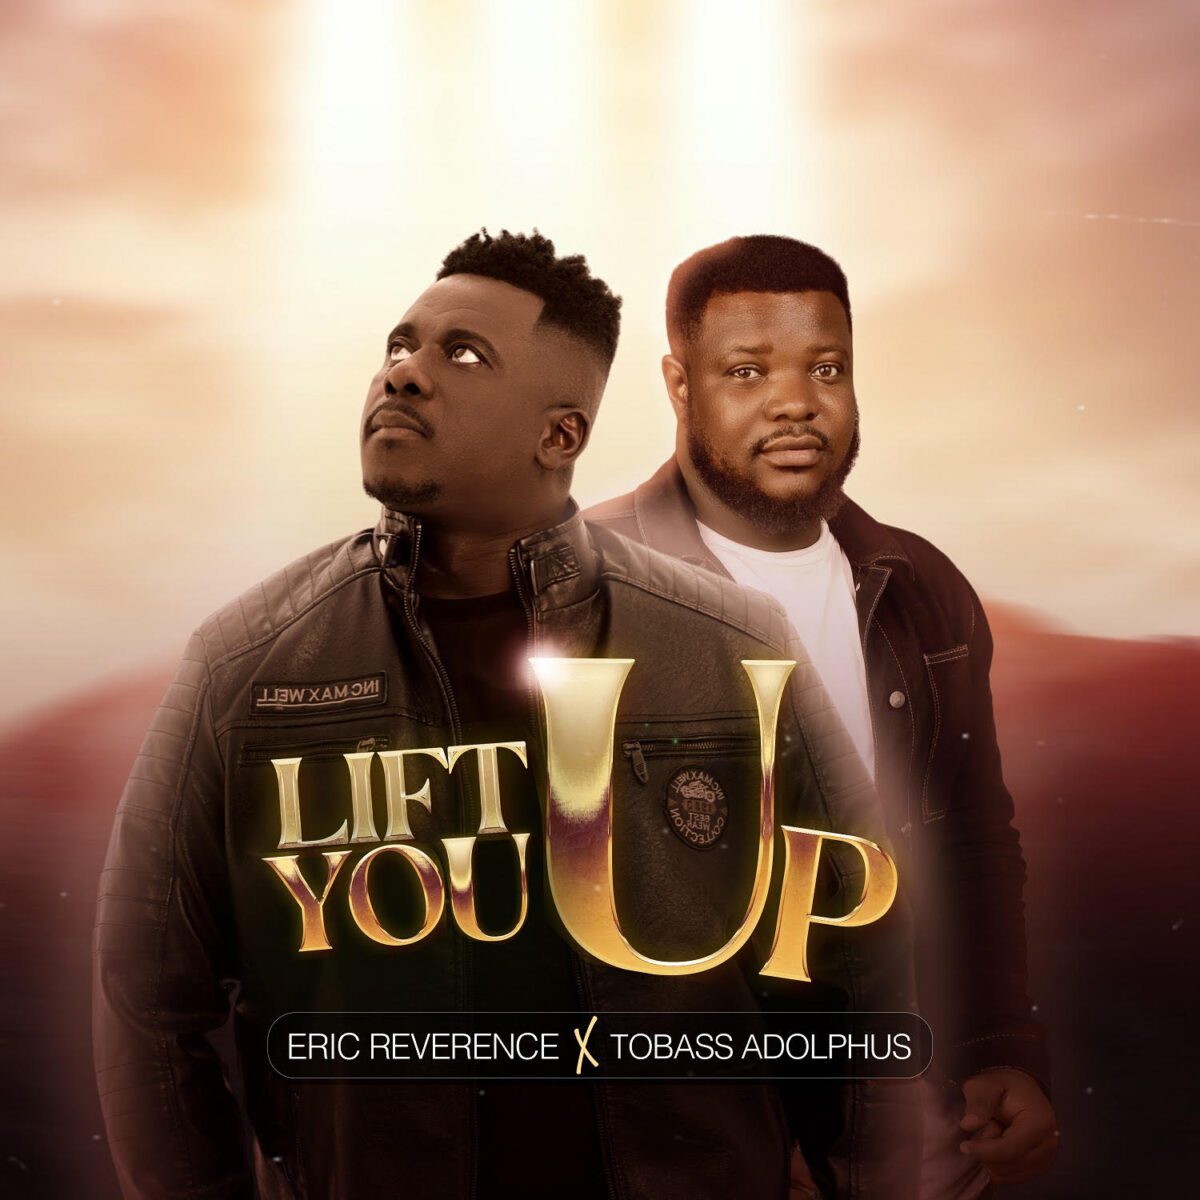 TMAQTALK MUSIC : Eric Reverence - Lift You Up Ft. Tobass Adolphus 4